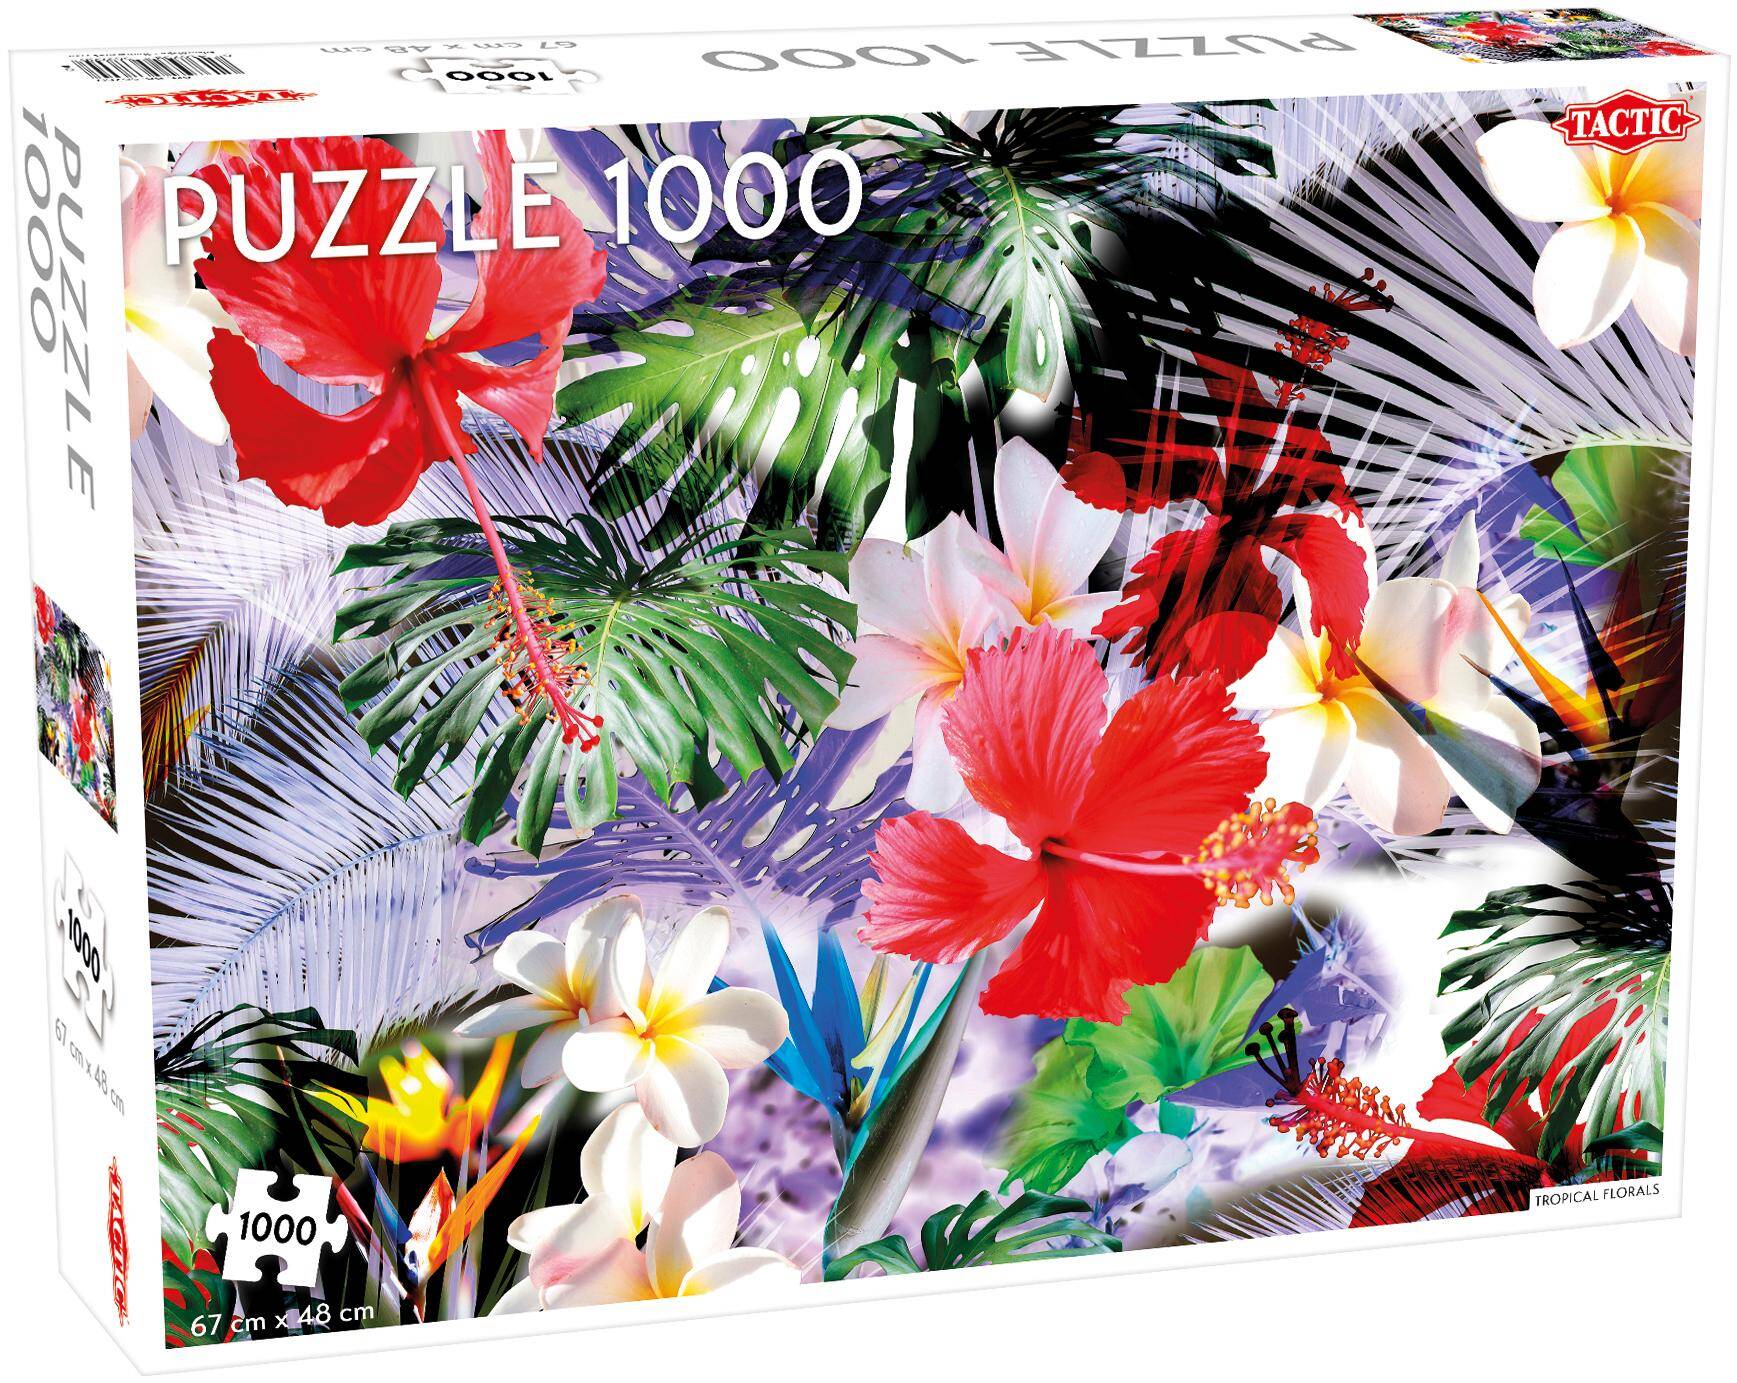 Puzzle 1000 Lover's Special Tropical Florals